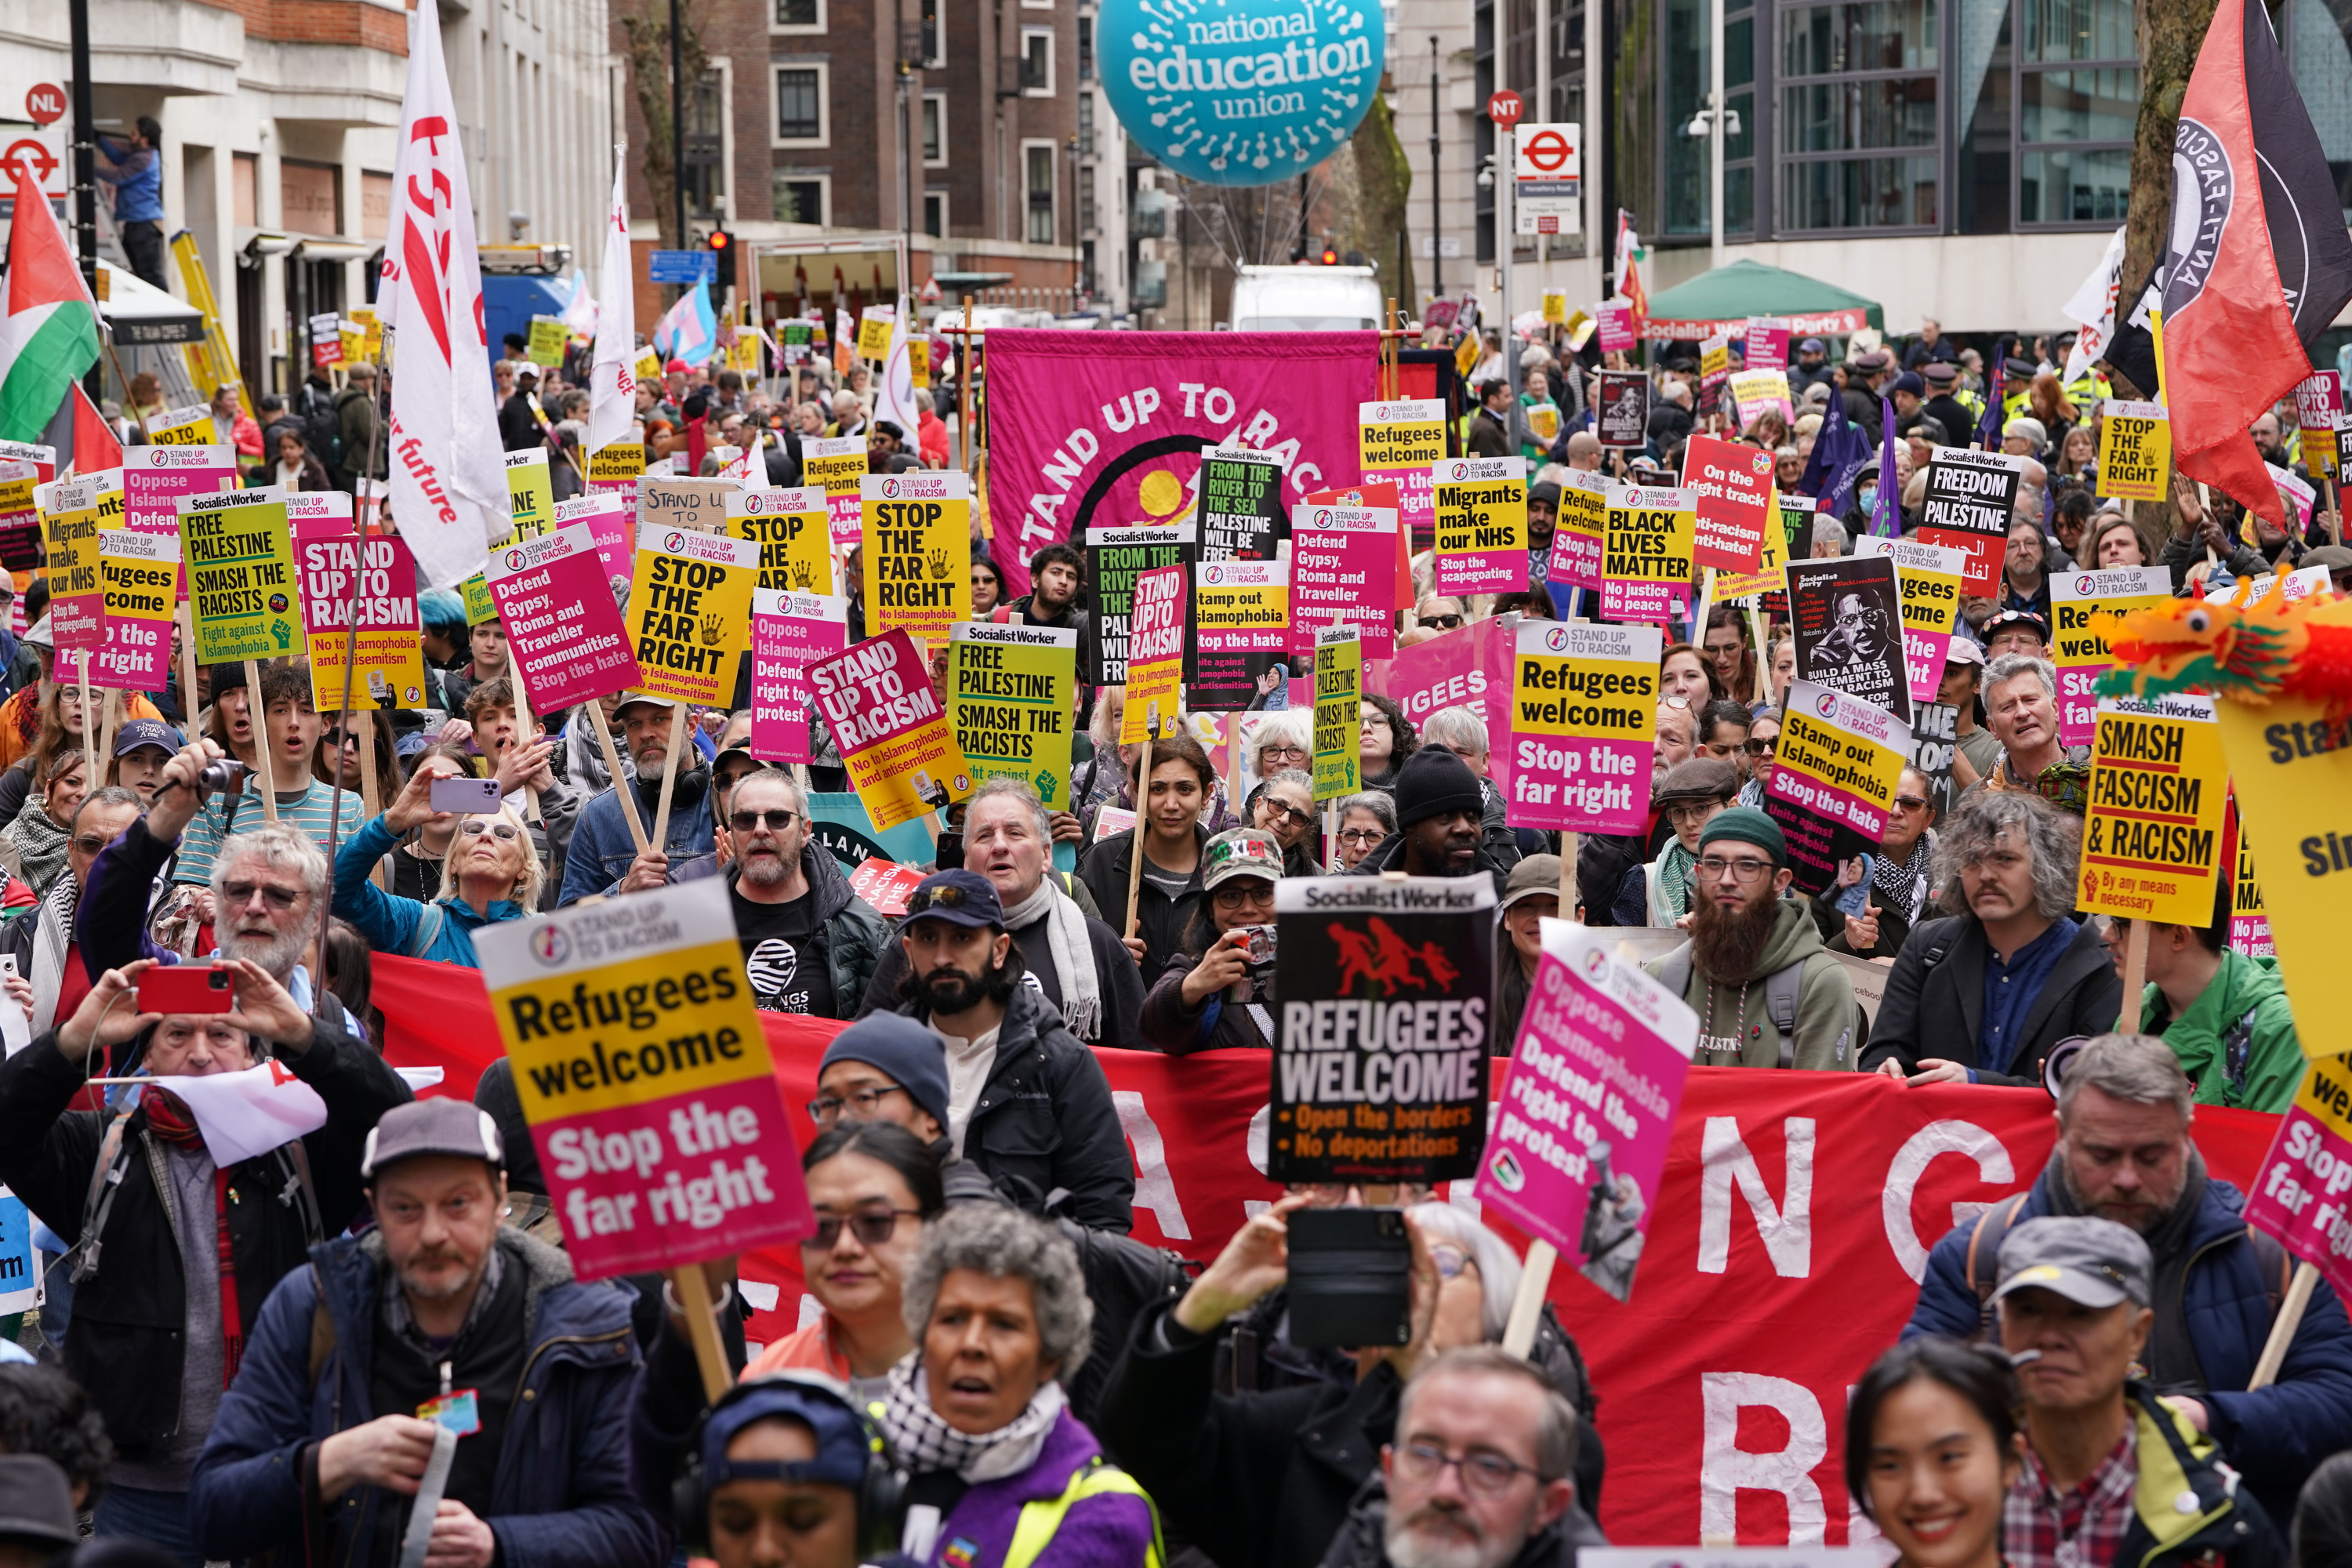 People take part in an anti-racism march in central London organised by Stand Up To Racism and trade unions (Lucy North/PA).